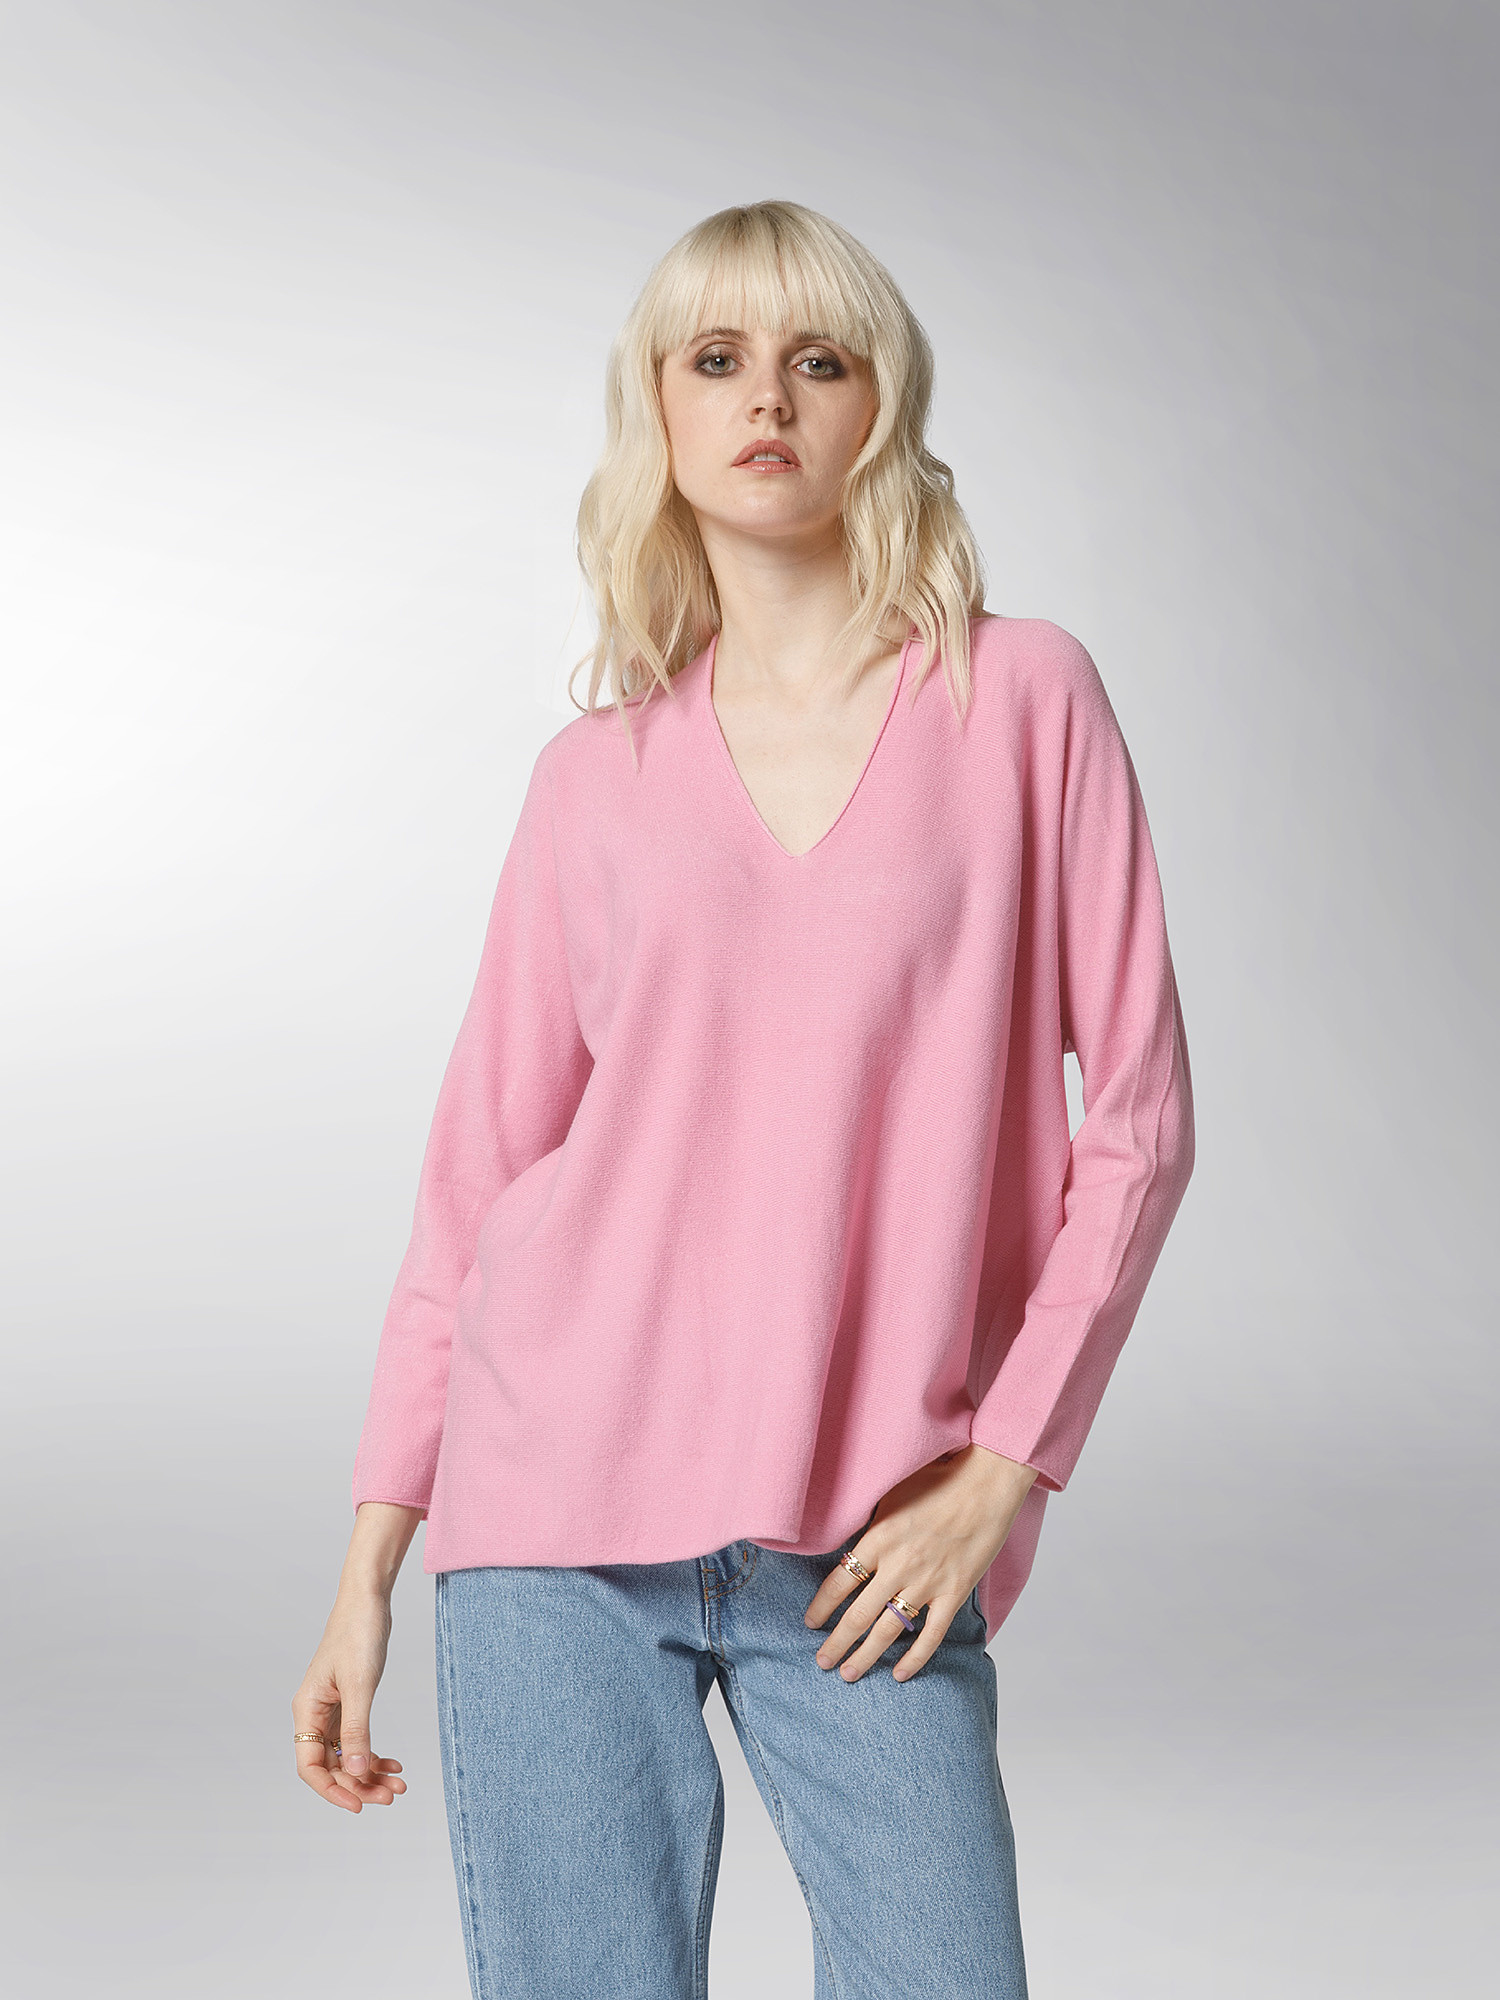 K Collection - Pullover, Rosa fuxia, large image number 3